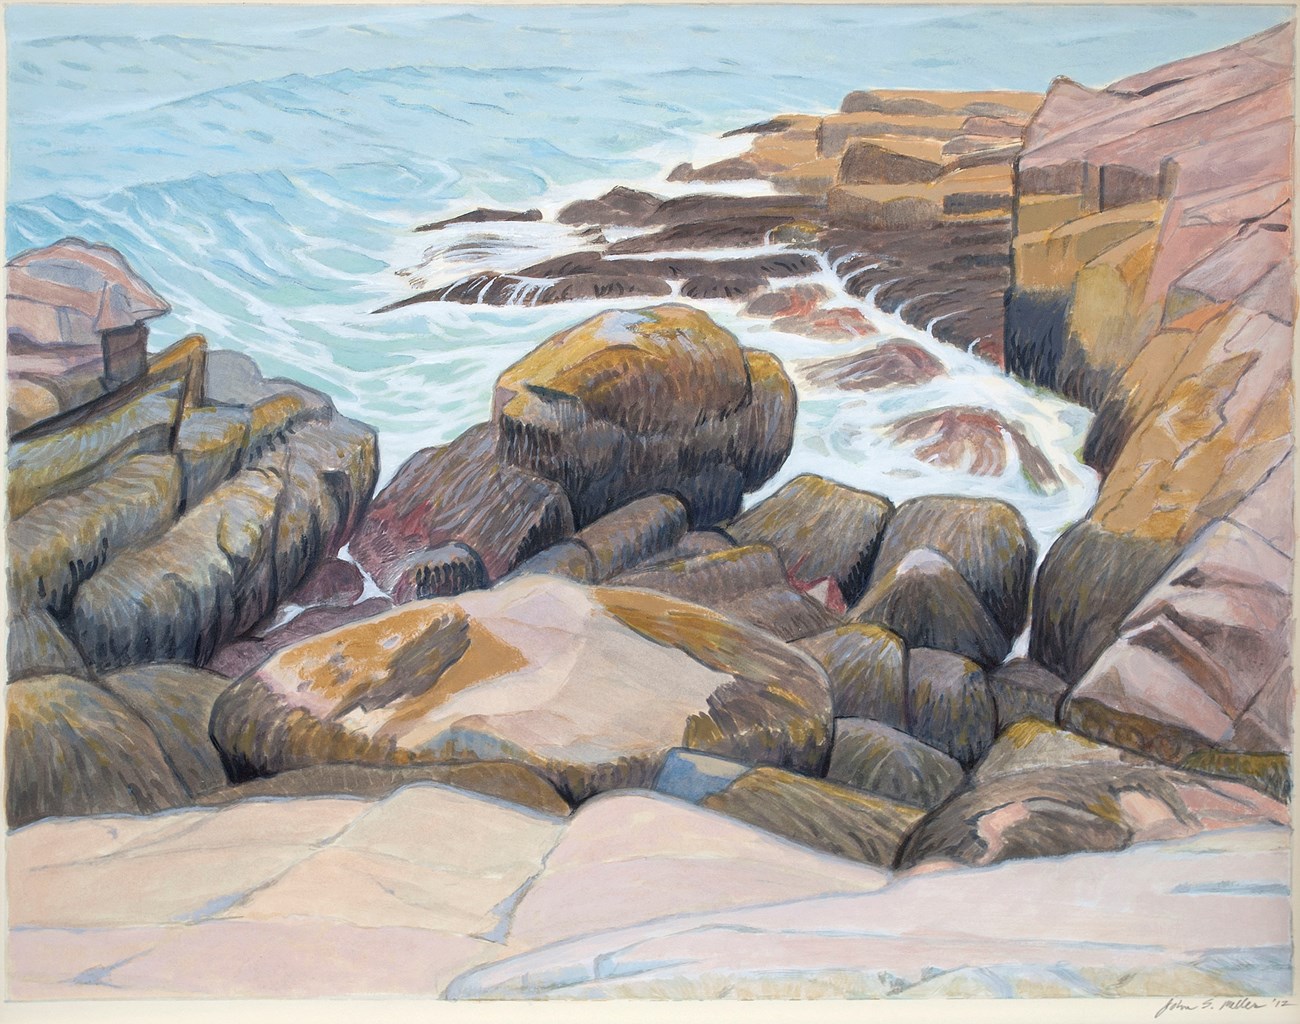 Acrylic painting of coastline with waves crashing against seaweed covered rocks. The water is a light blue color and the rocks are painted with light brown, yellows, and pinks.  In the center is a large boulder that has the shape of a bison bent over.